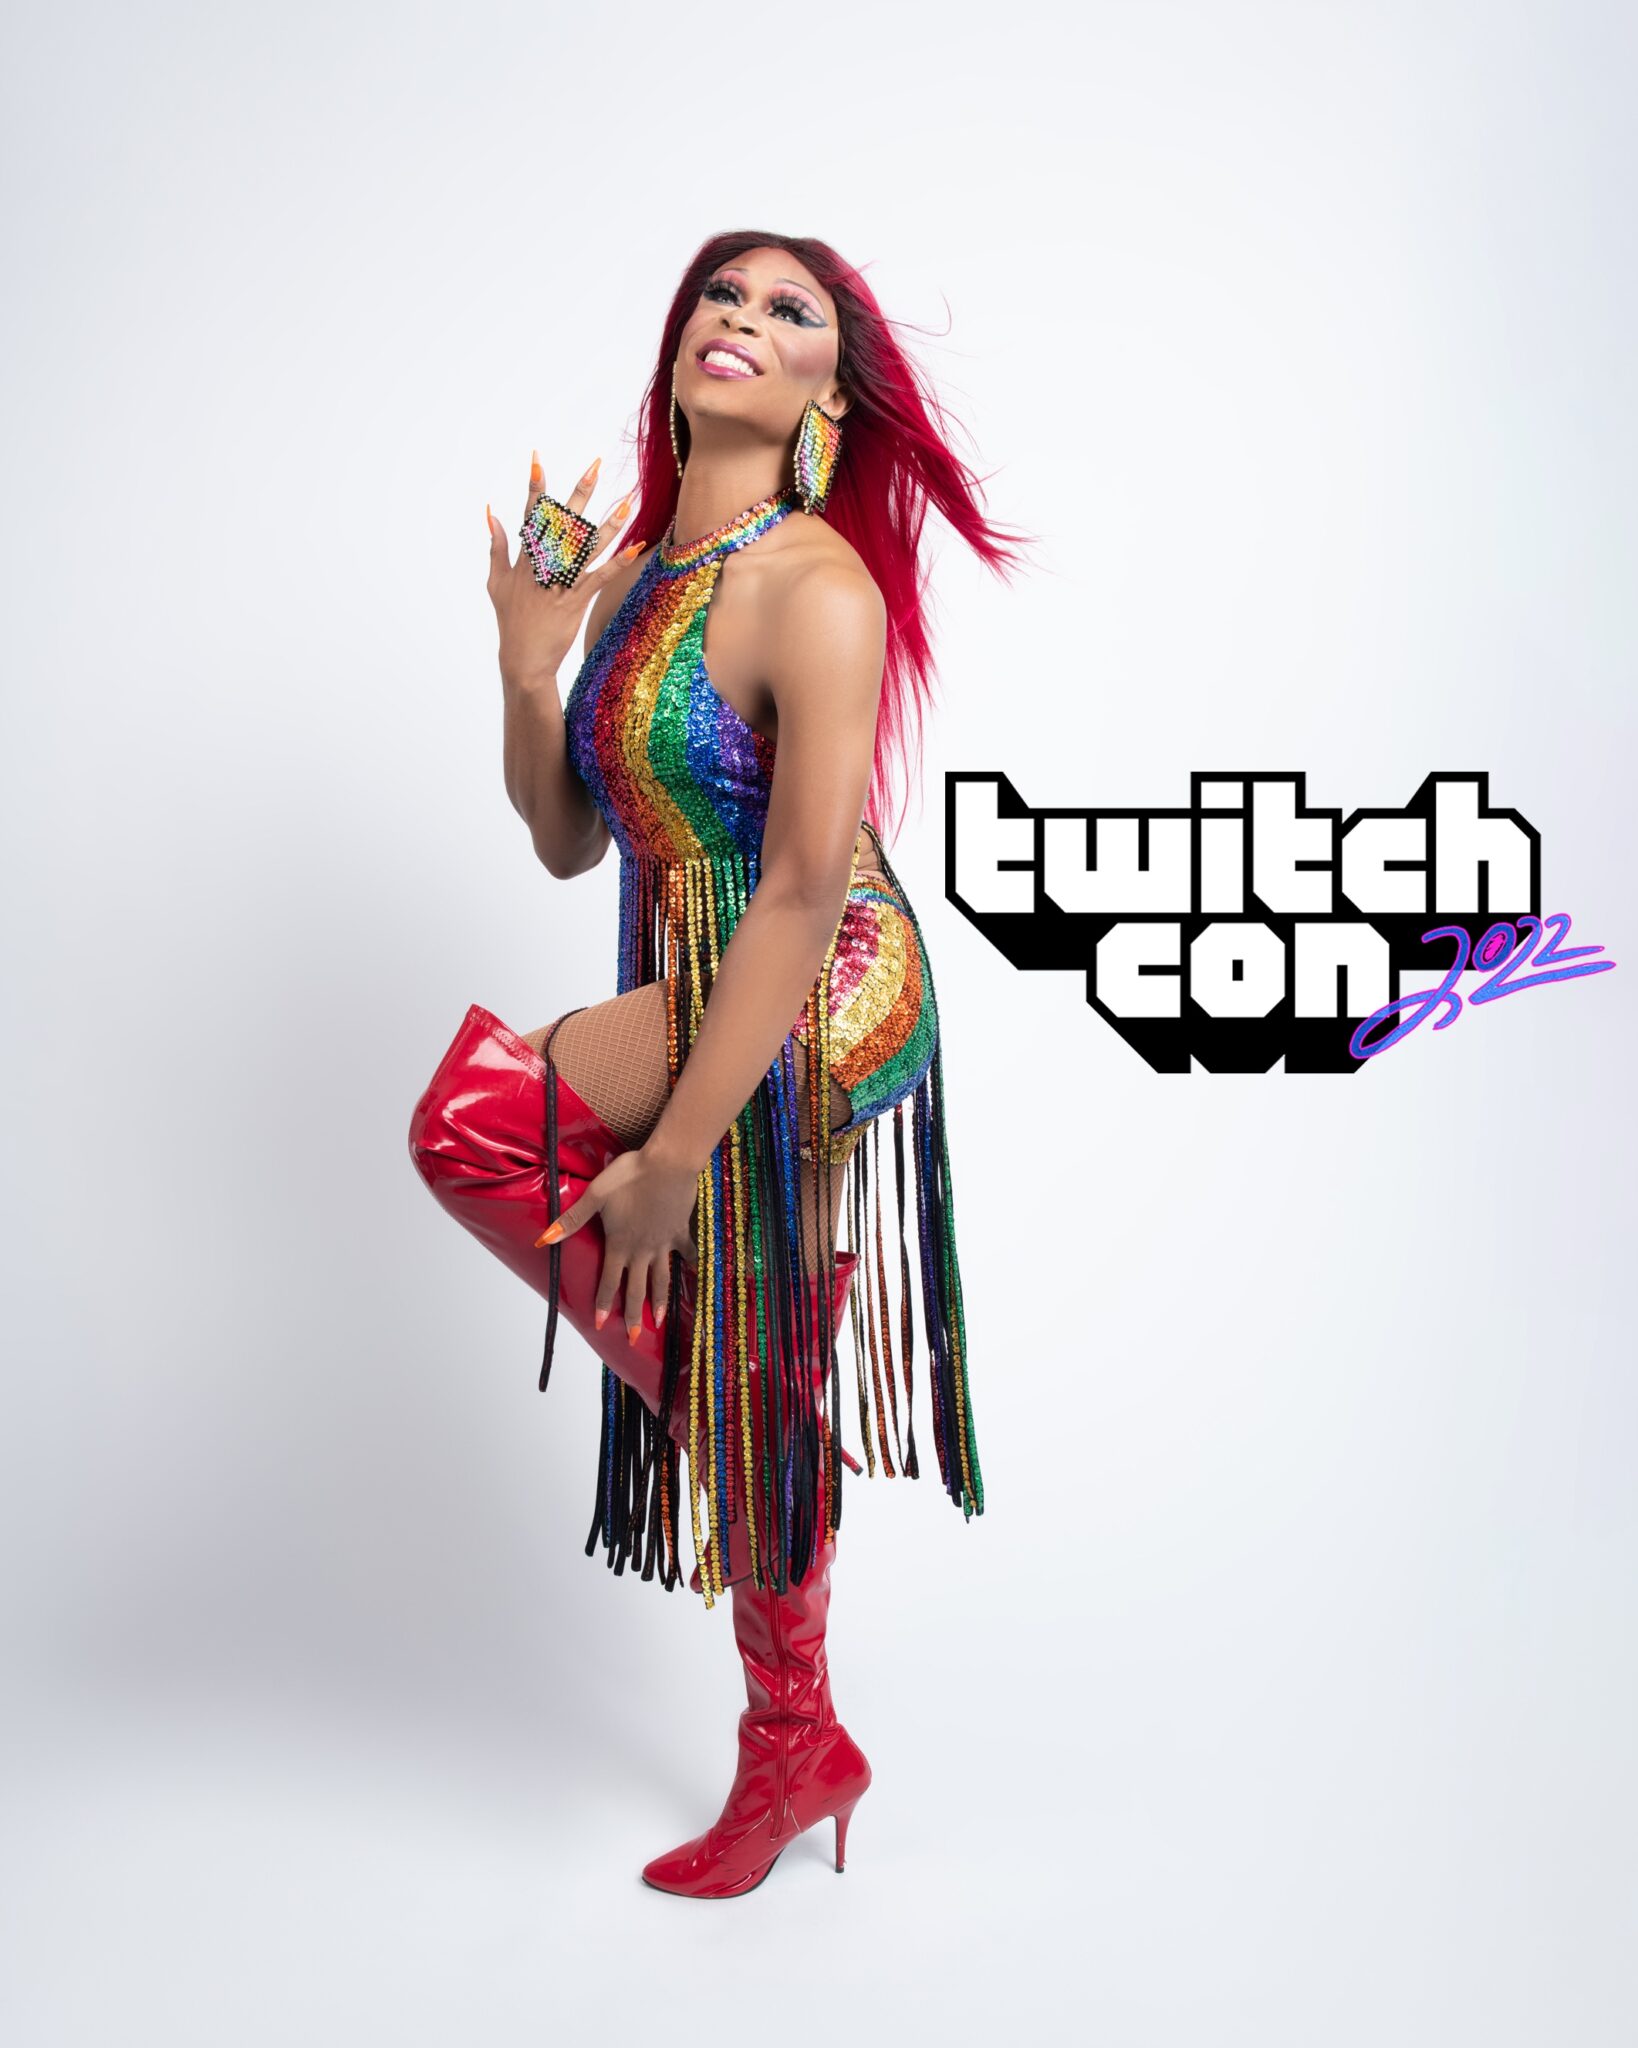 Rose Evergreen in a rainbow sequin outfit posing for Twitch Con 2022